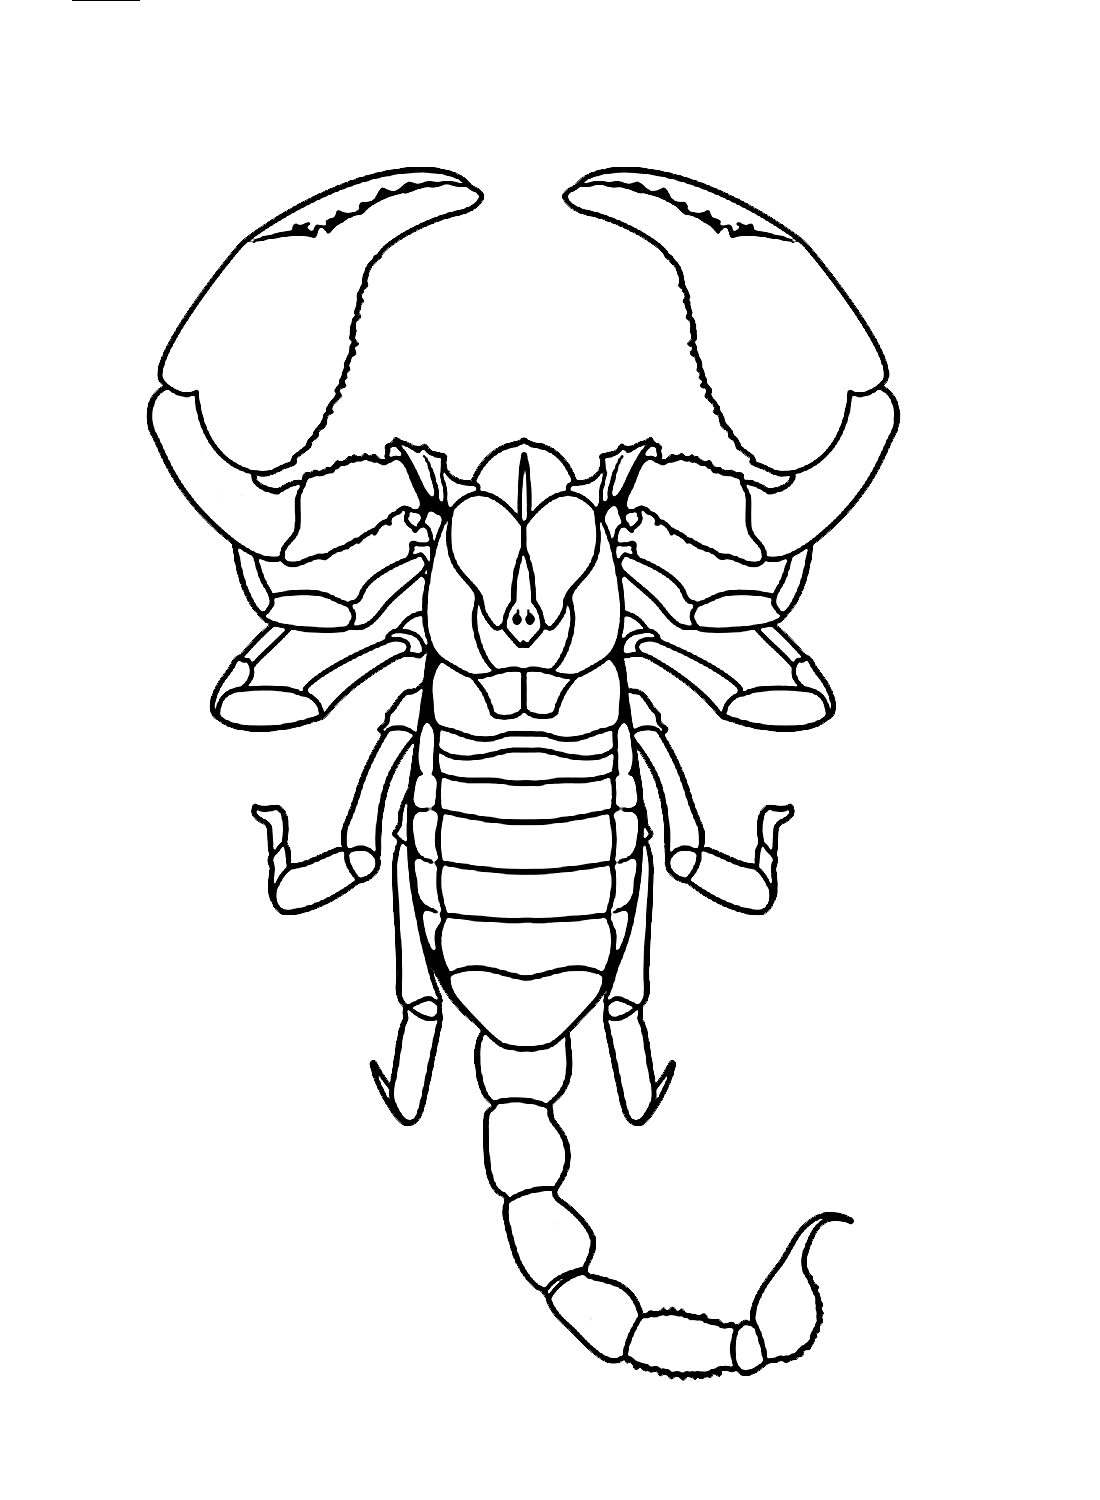 Scorpion Coloring Page - Free Printable Coloring Pages